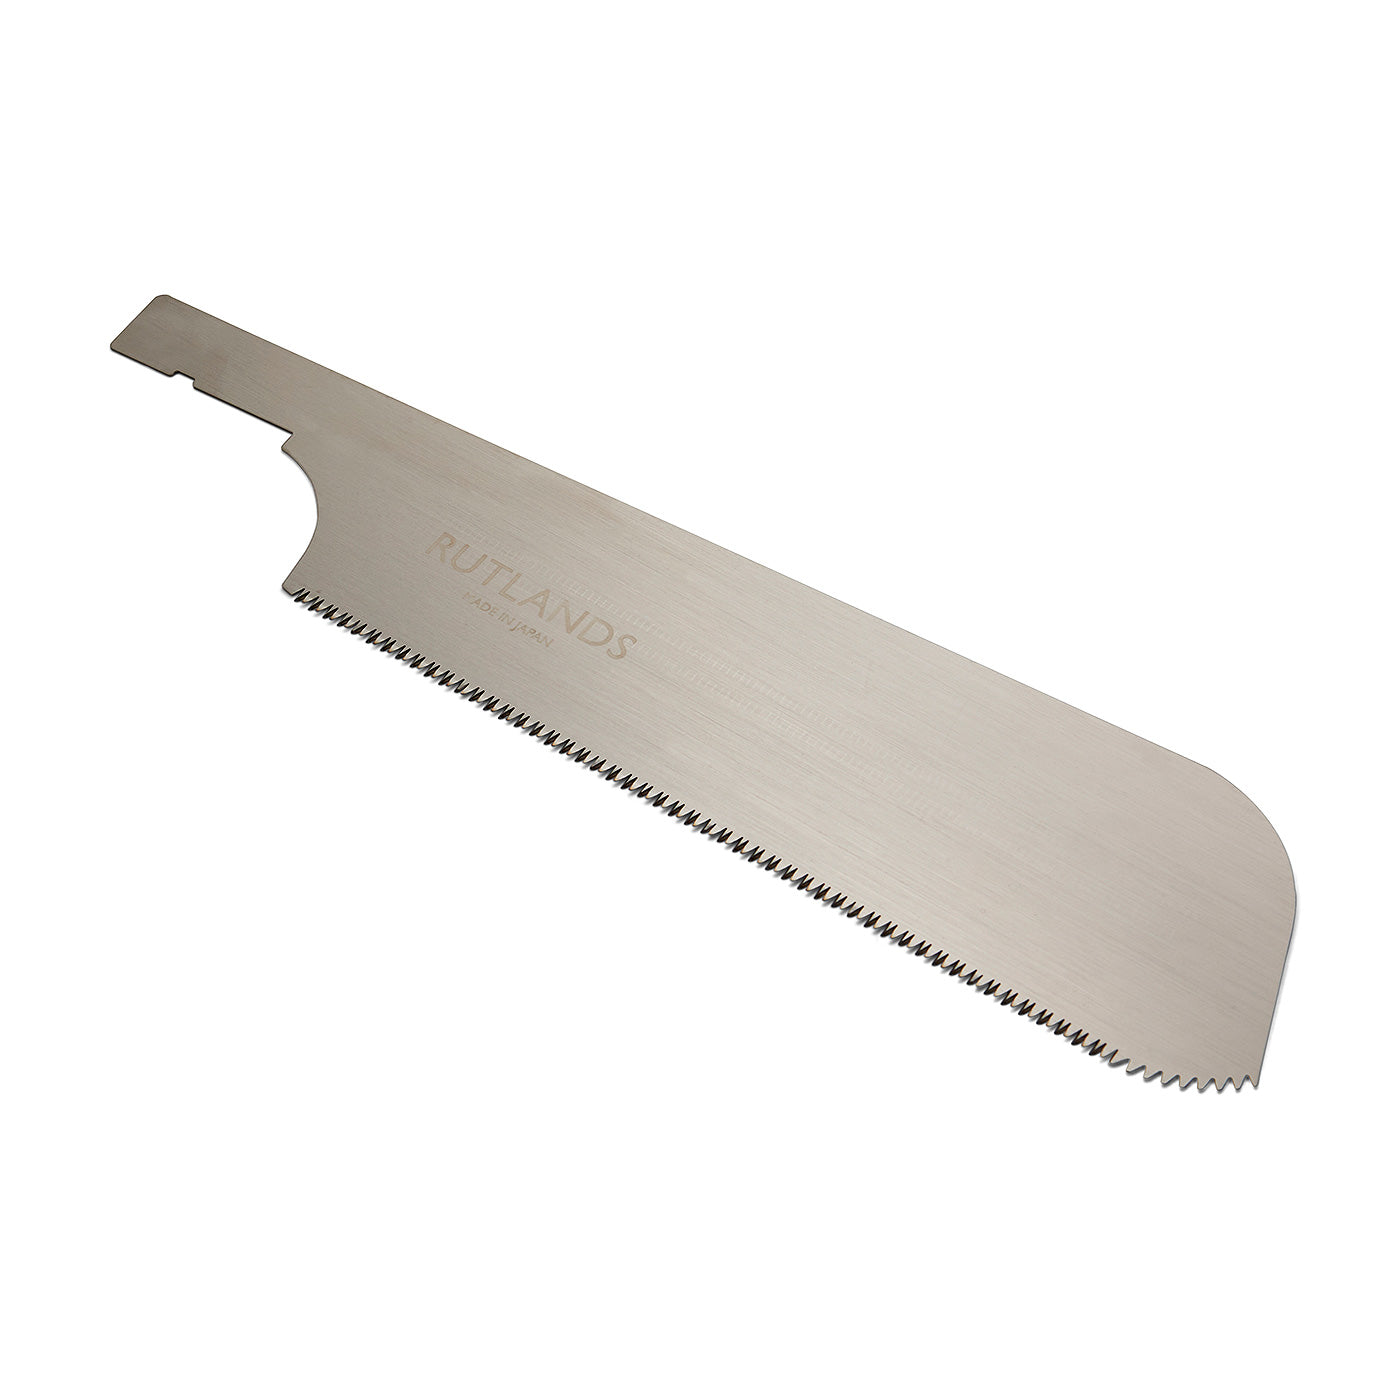 Blade for Kataba Crosscut Saw - 180mm